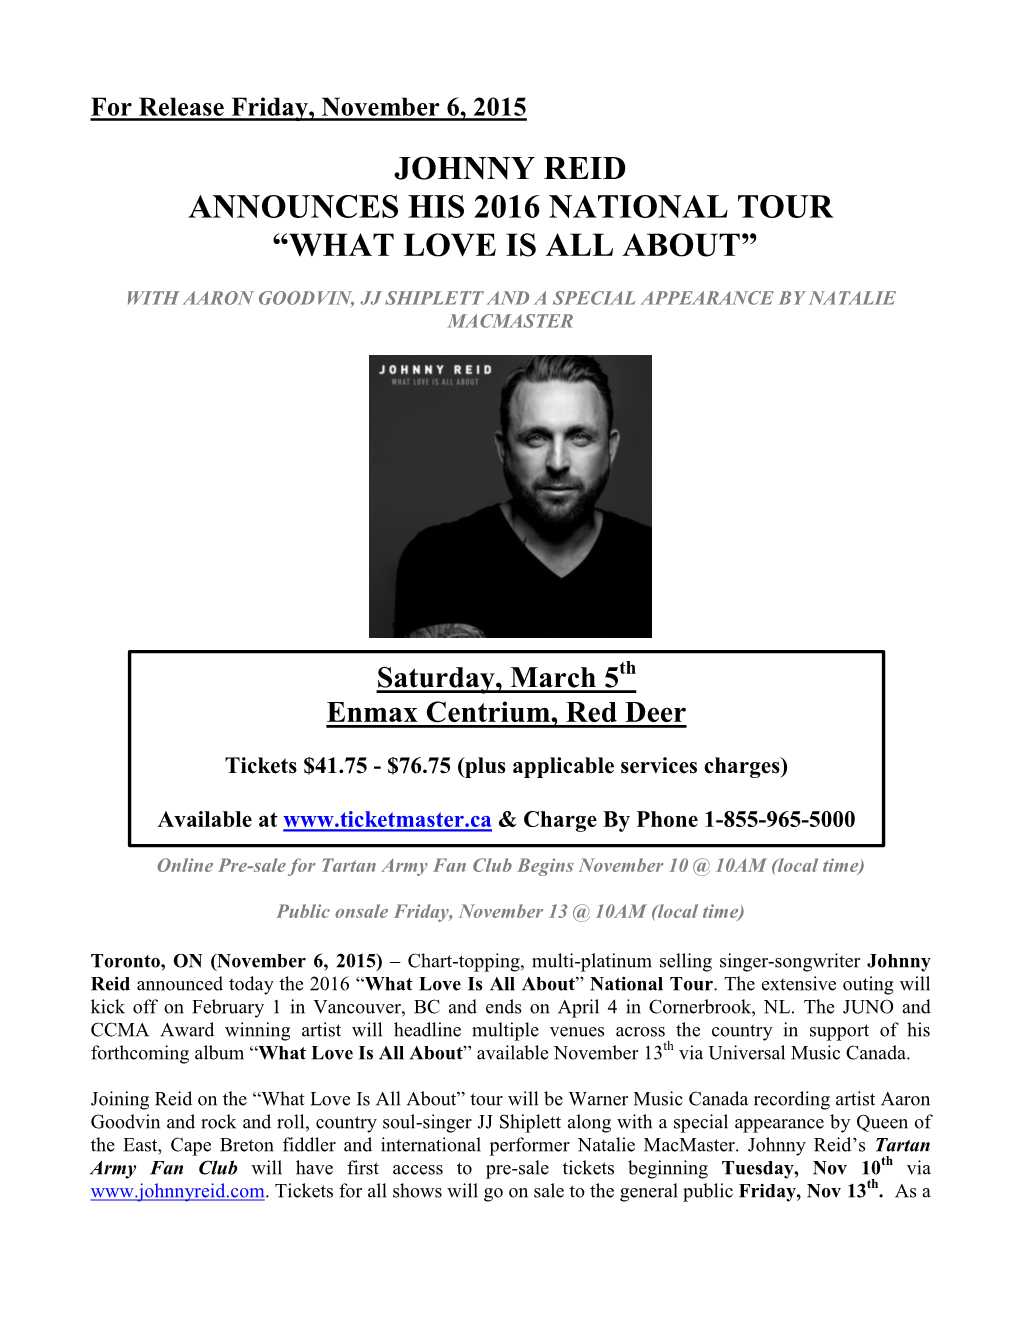 Johnny Reid Announces His 2016 National Tour “What Love Is All About”